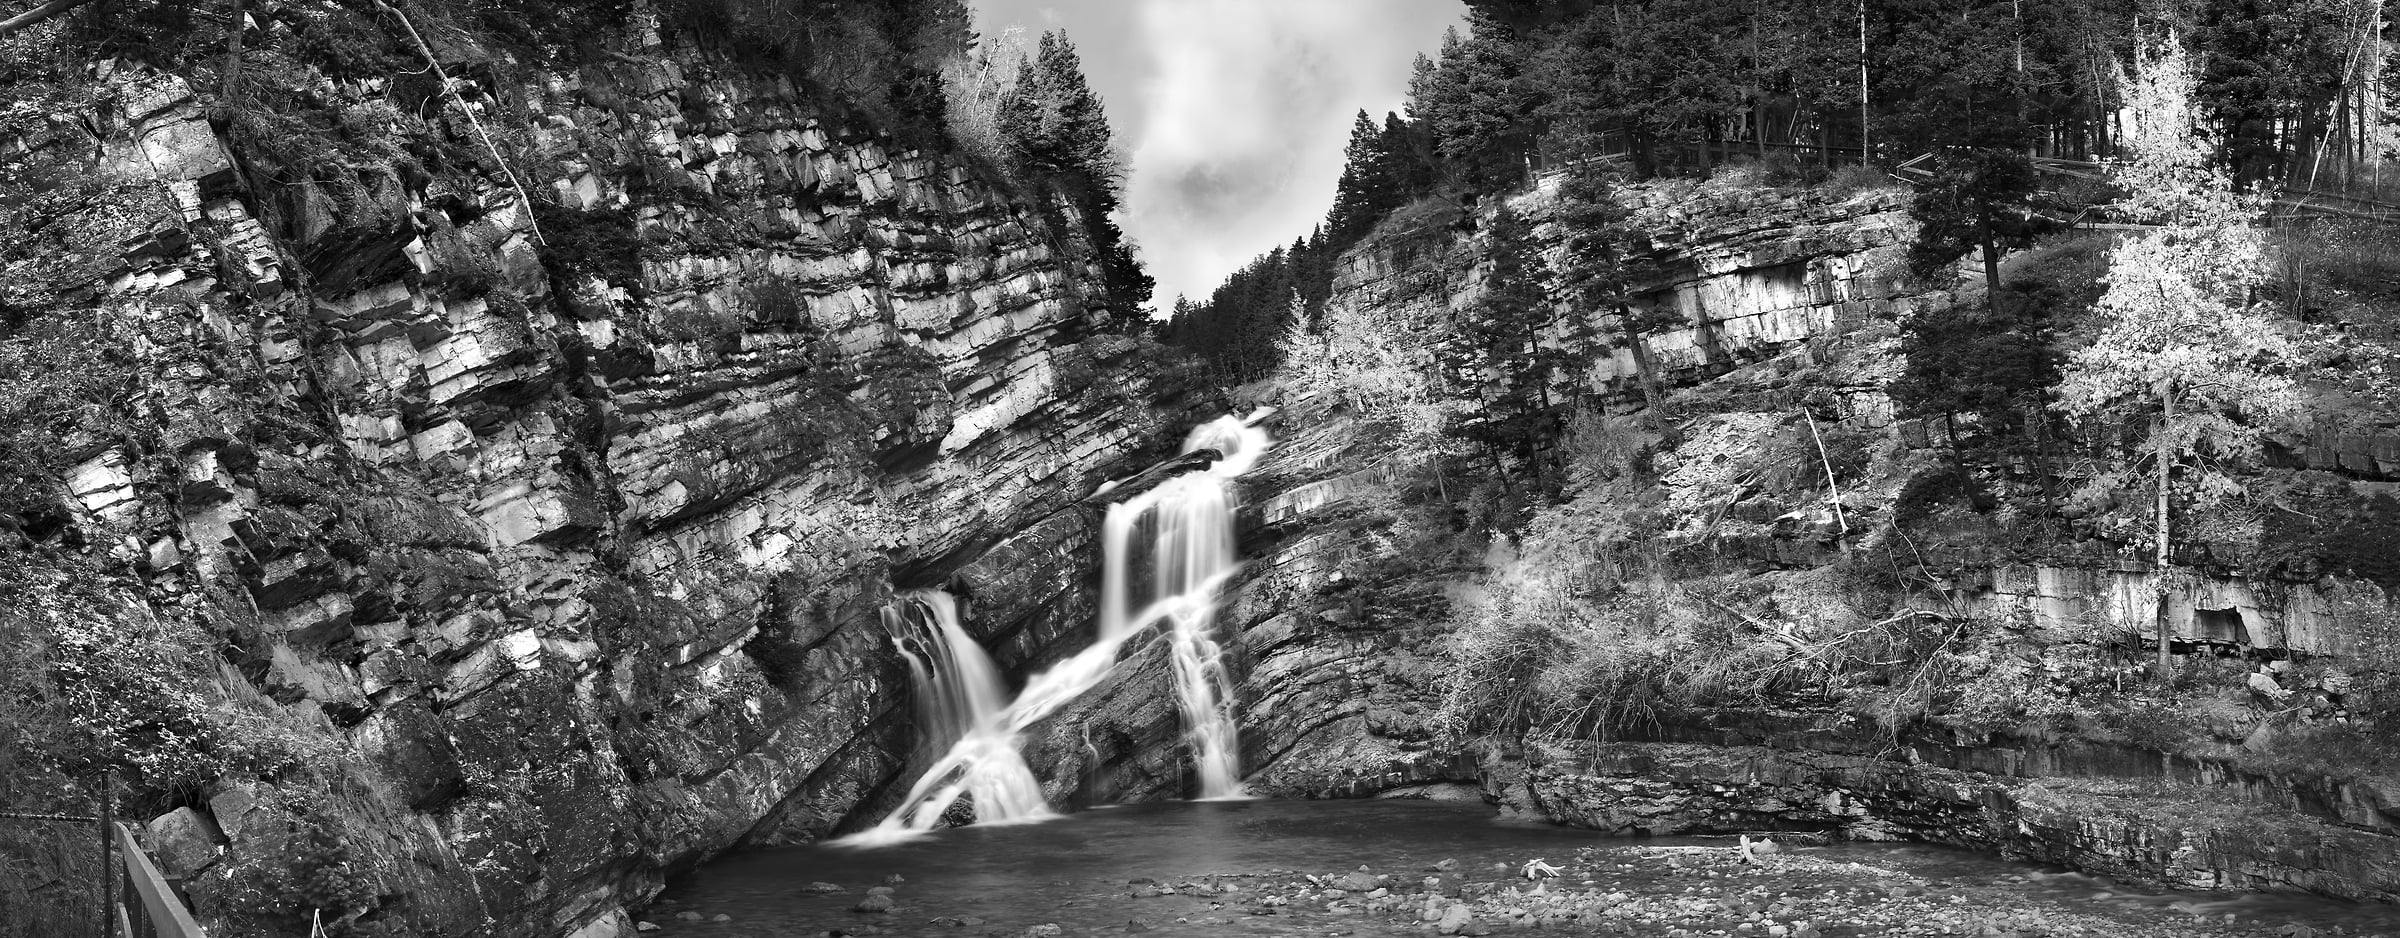 1,408 megapixels! A very high resolution, large-format VAST photo print of Cameron Falls waterfall in Waterton Lakes National Park; fine art nature photograph created by Steven Webster in Alberta, Canada.